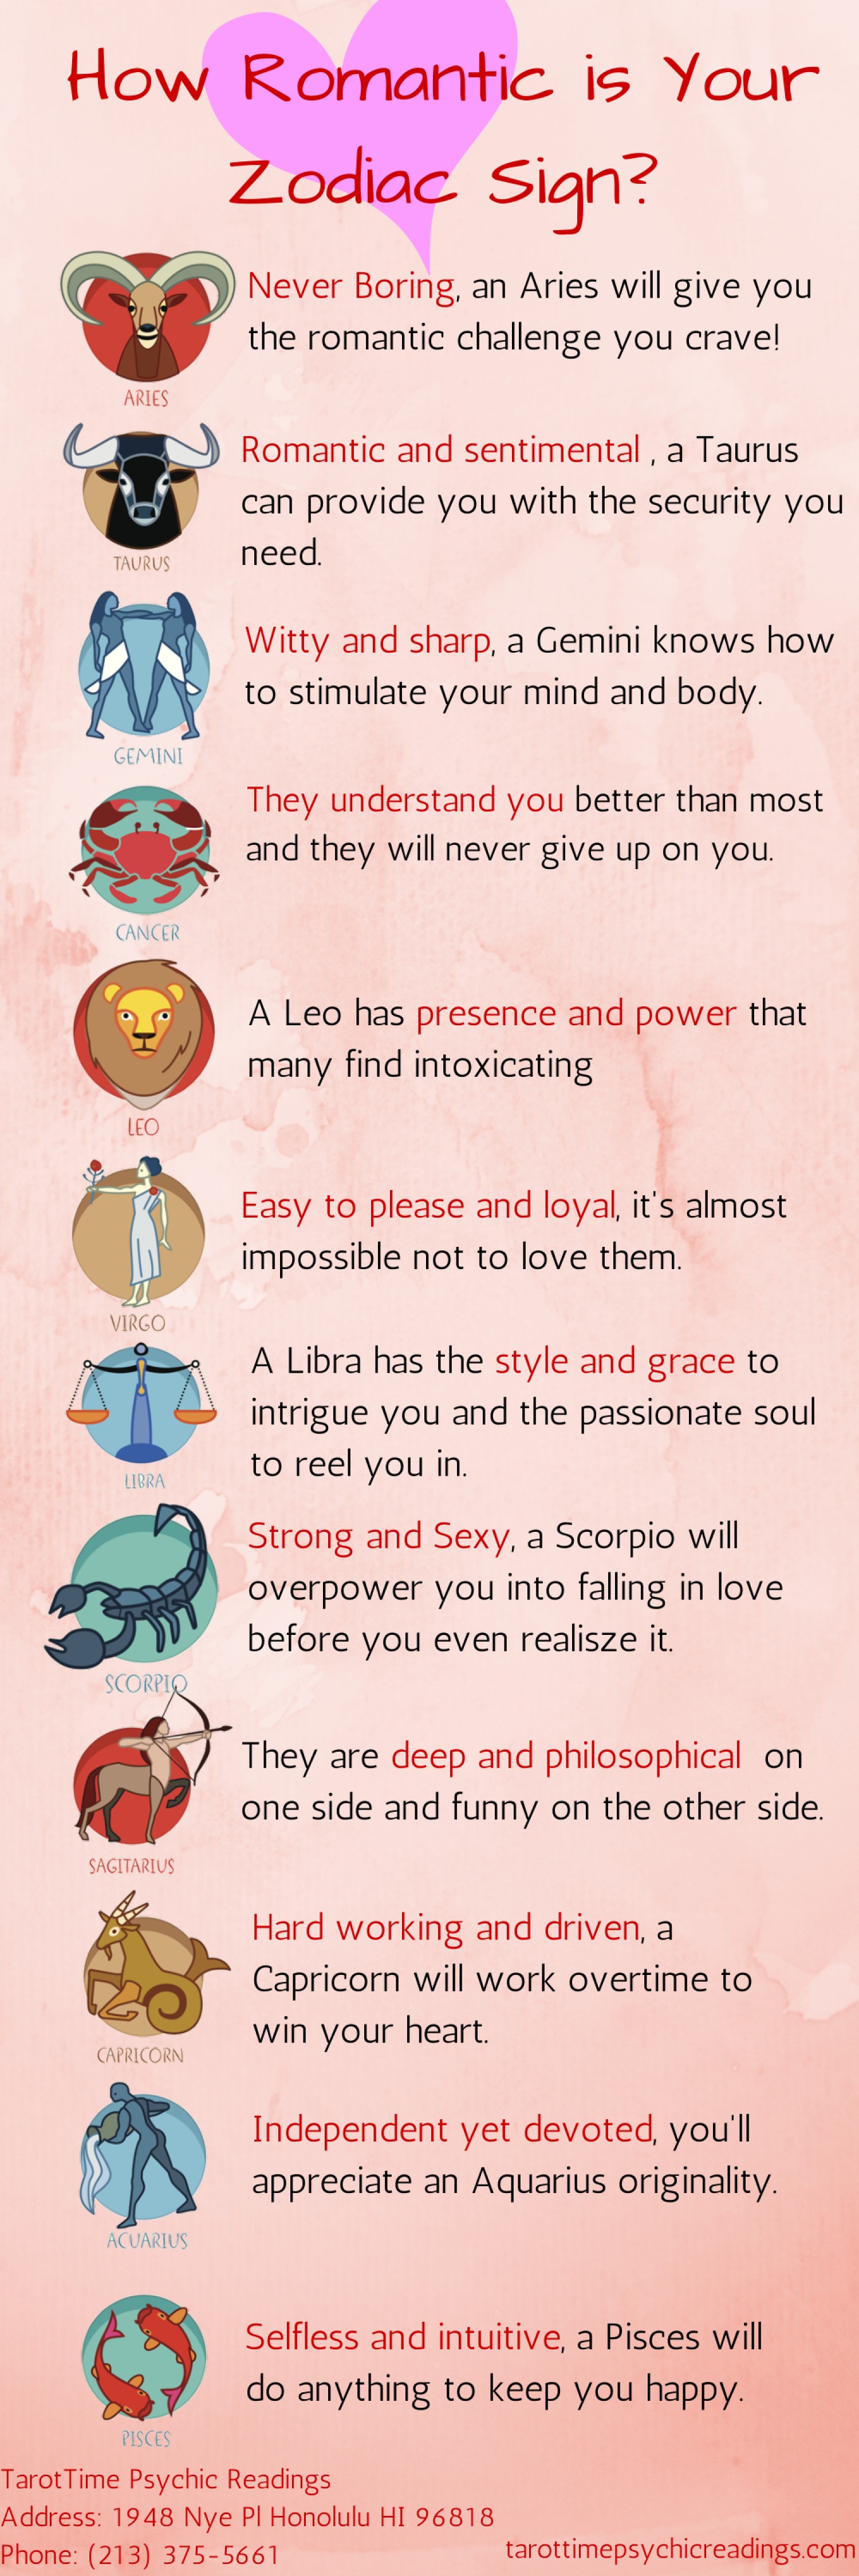 How Romantic is Your Zodiac Sign | Visual.ly